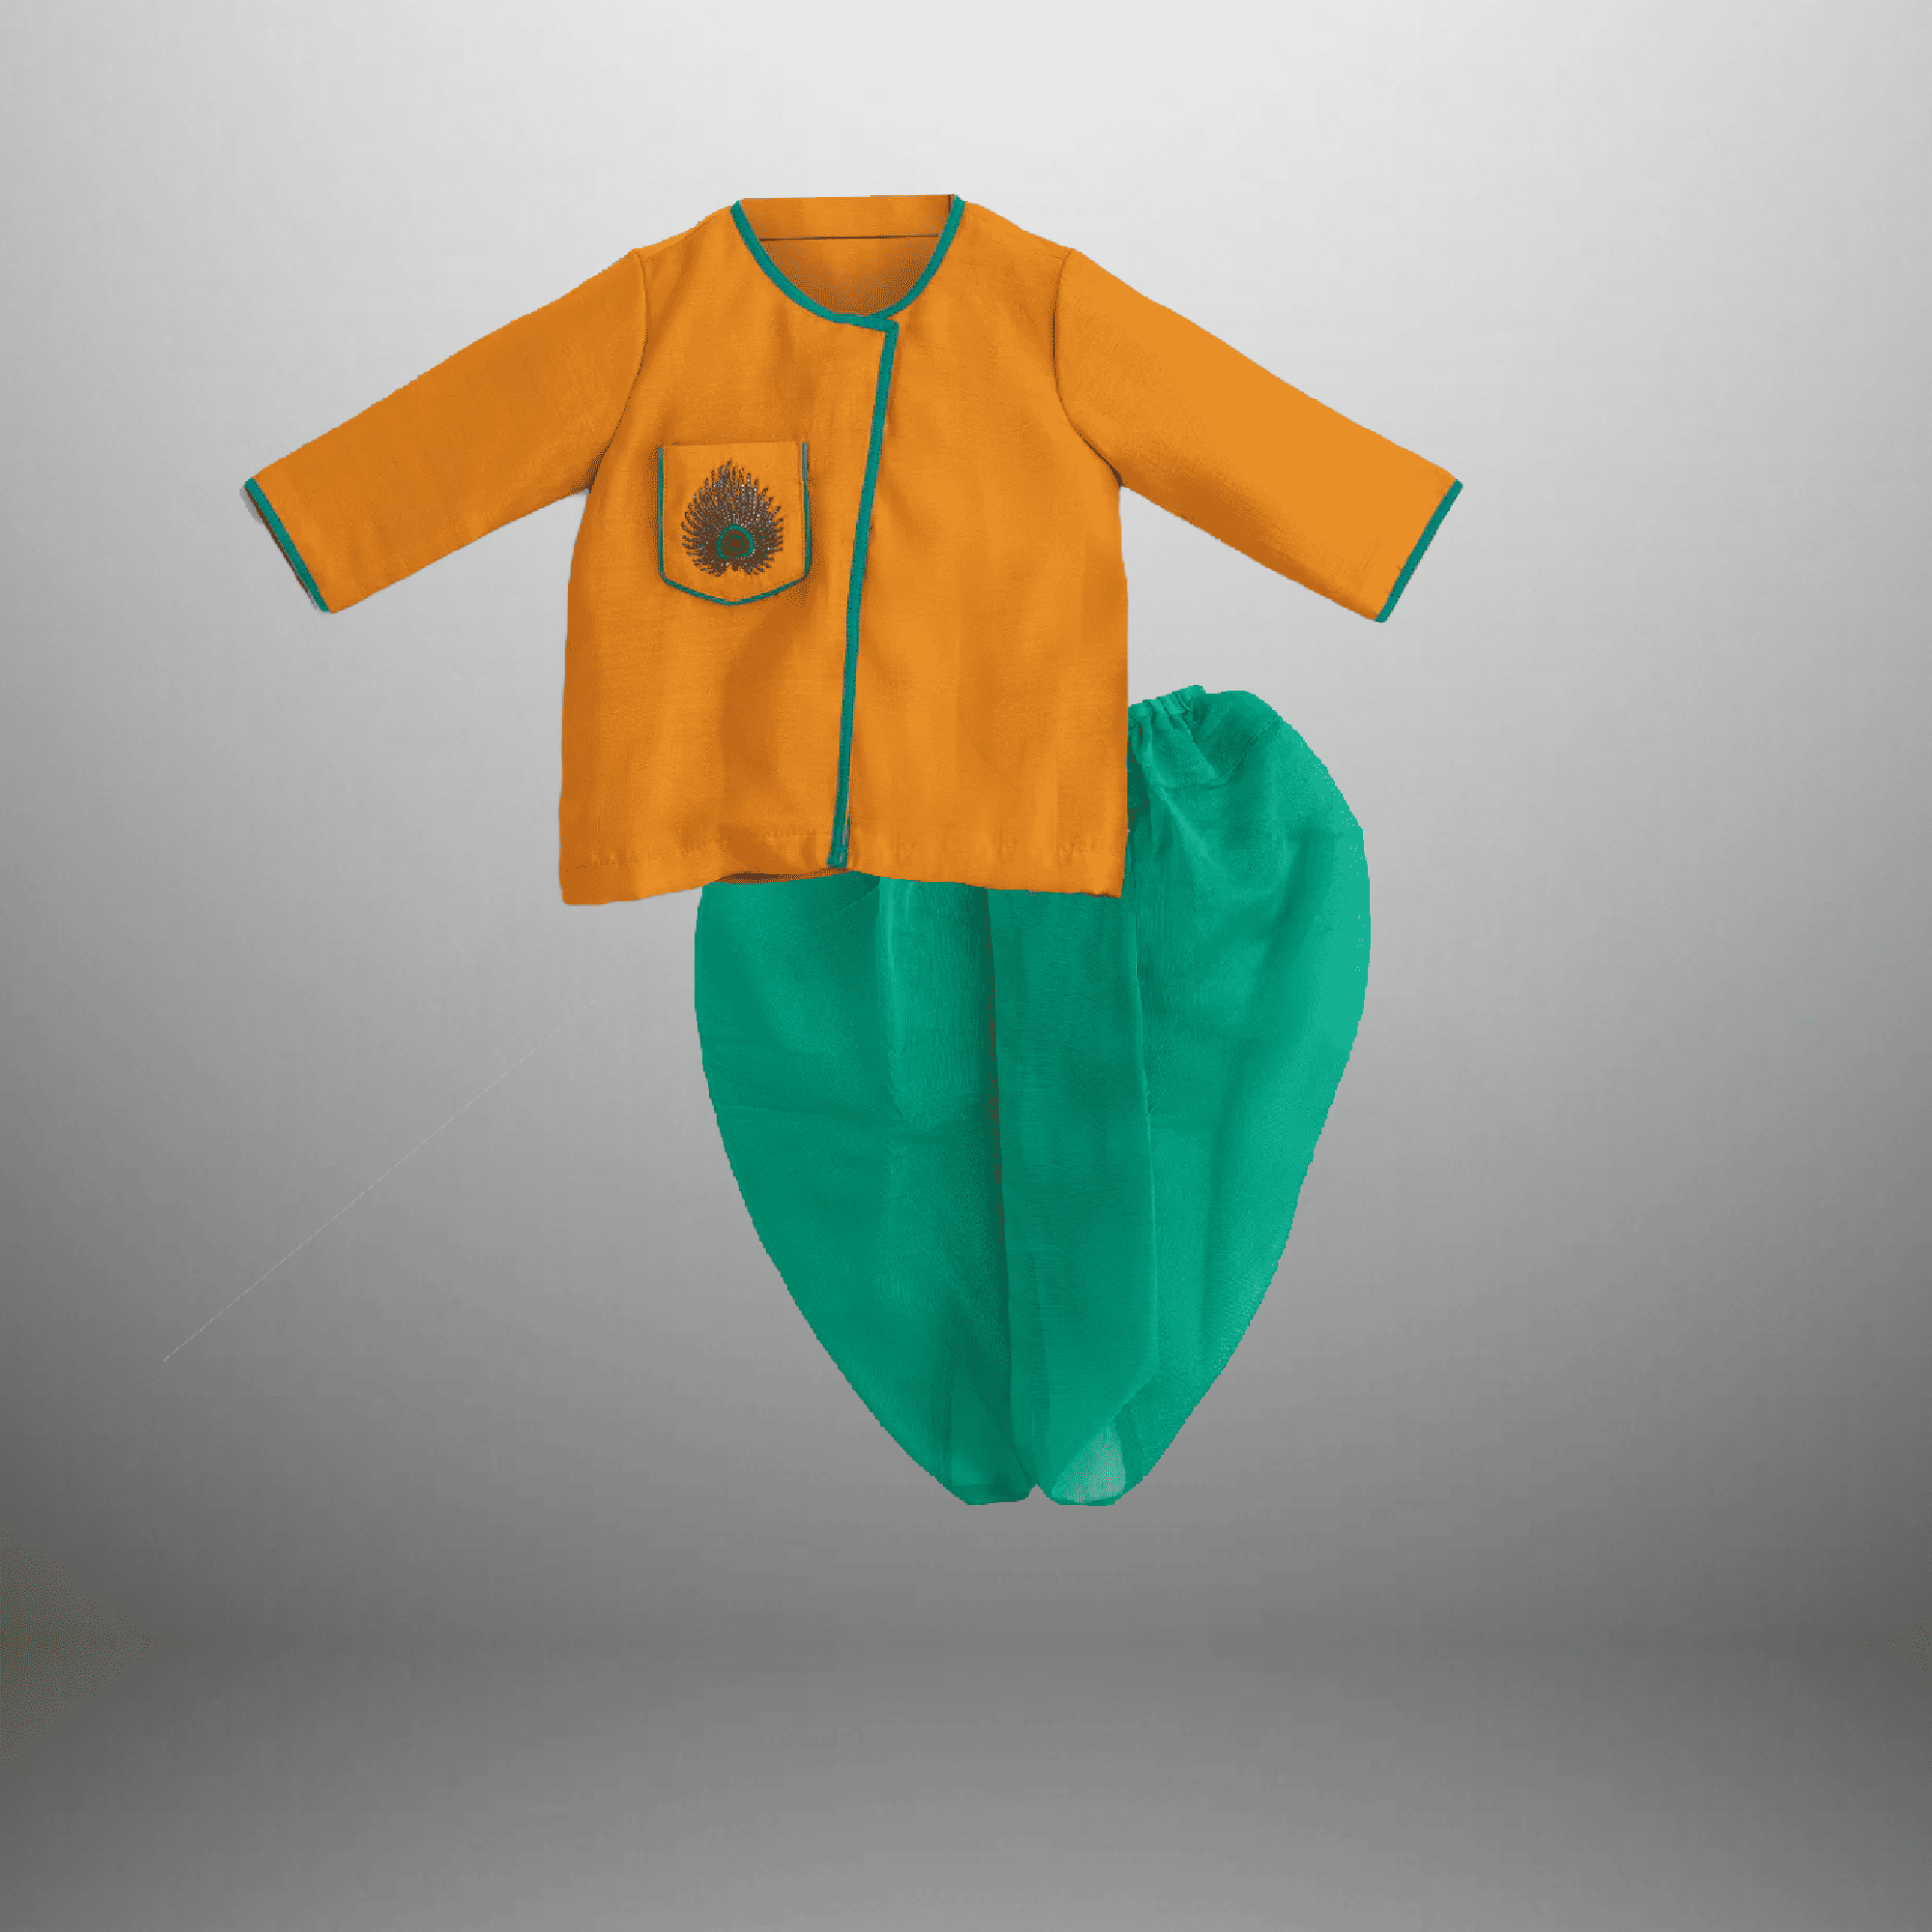 Toddler's yellow kurta with peacock feather and Light green Dhoti-RKFCTT083